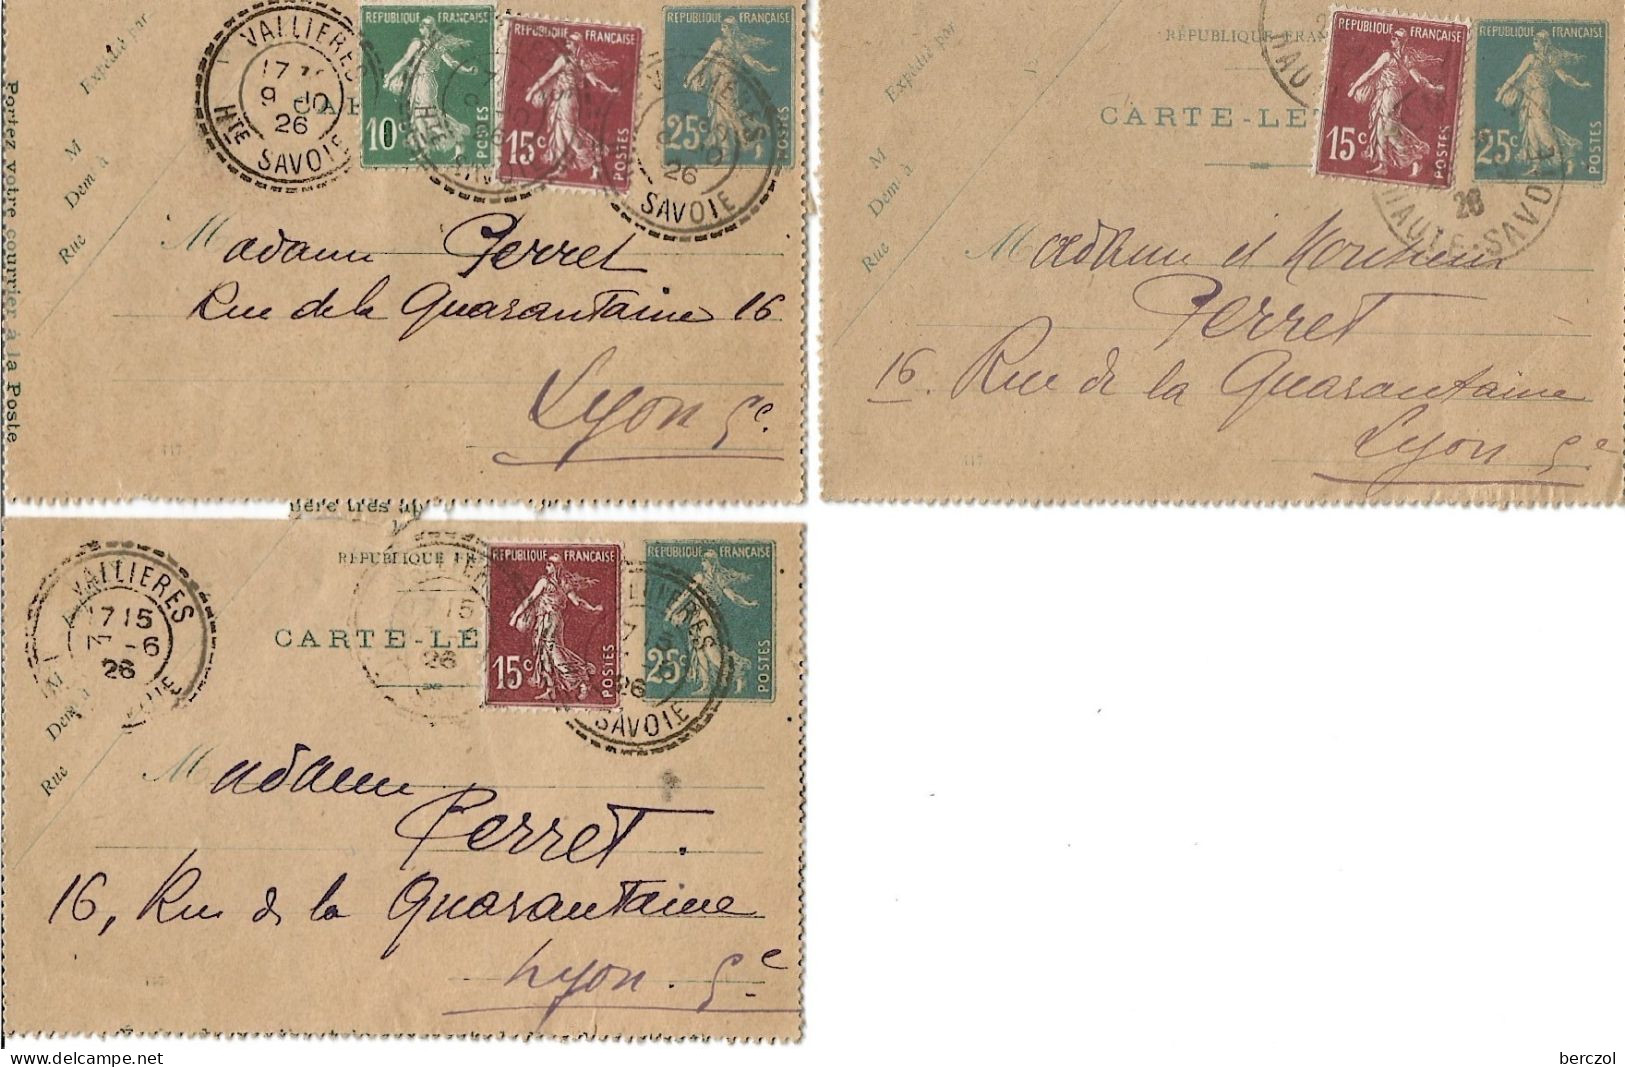 FRANCE ANNEE1907/1939 LOT DE 3 ENTIERS TYPE SEMEUSE CAMEE N° 140 CL1  TB DATE : 417 - Letter Cards